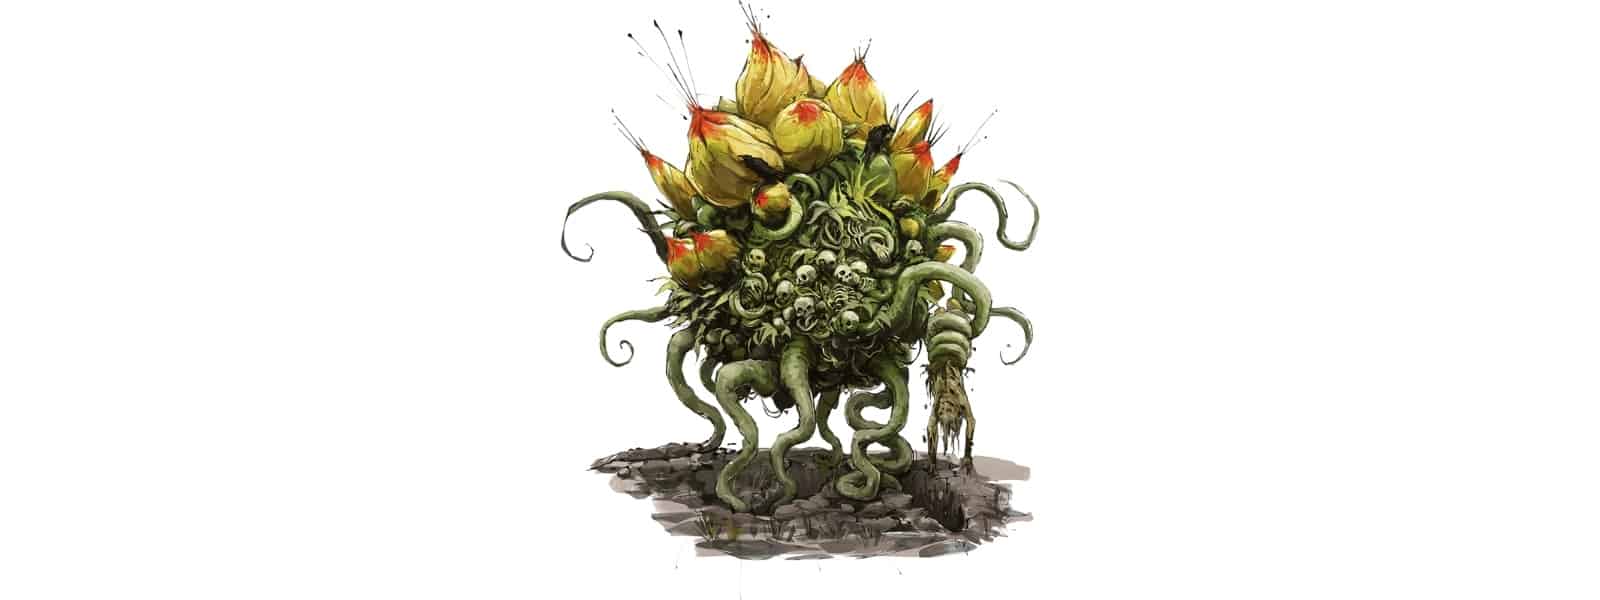 Corpse Flower DnD 5e: Stat Block, Encounters, DM Tips and More » Black